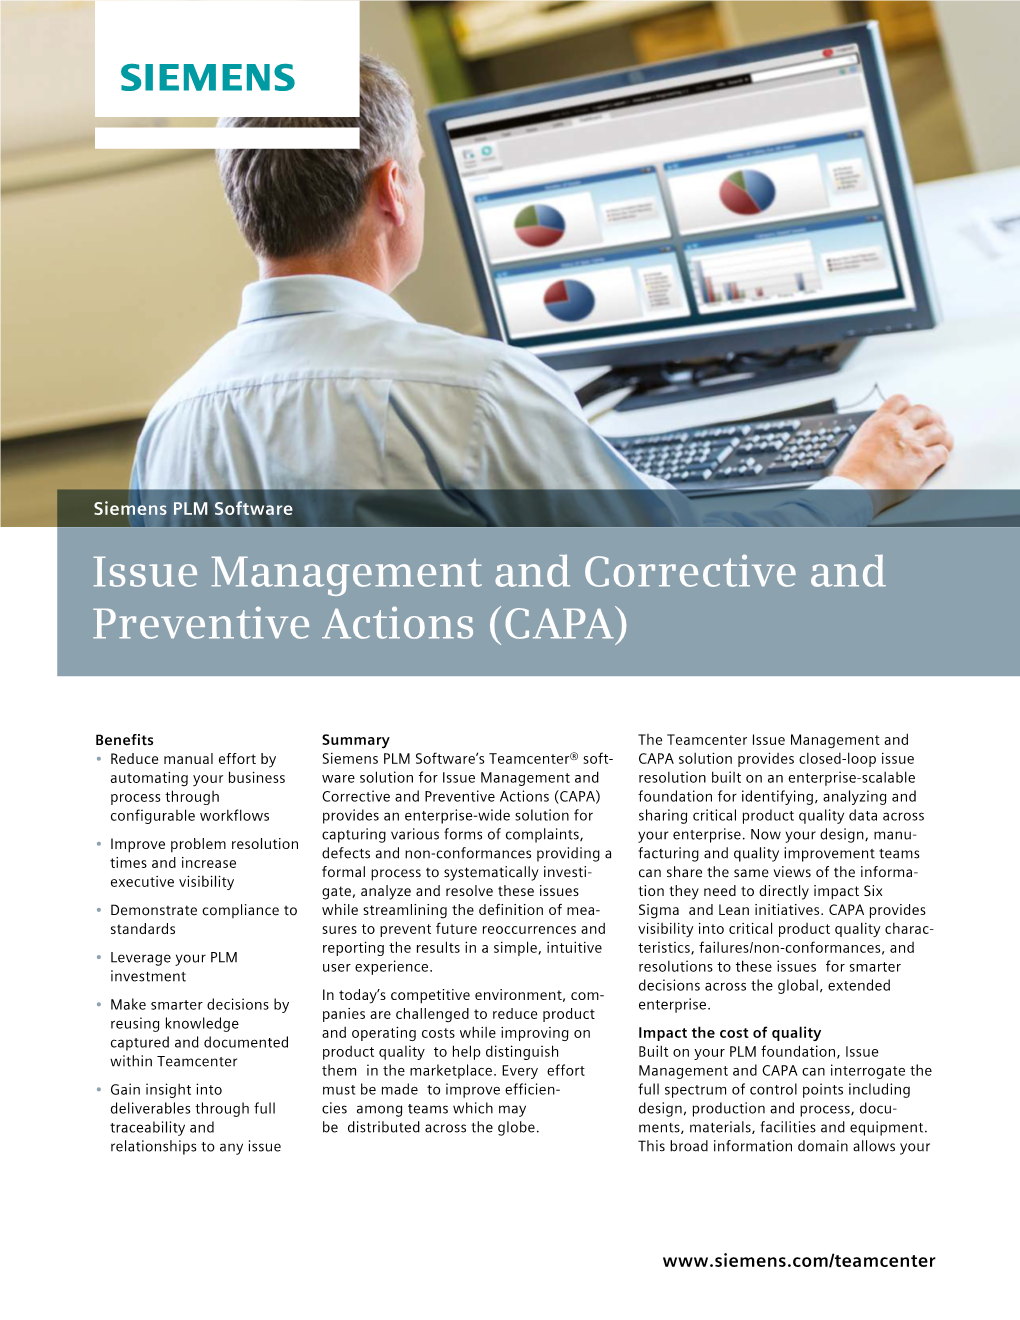 Siemens PLM Teamcenter Issue Management and CAPA Fact Sheet